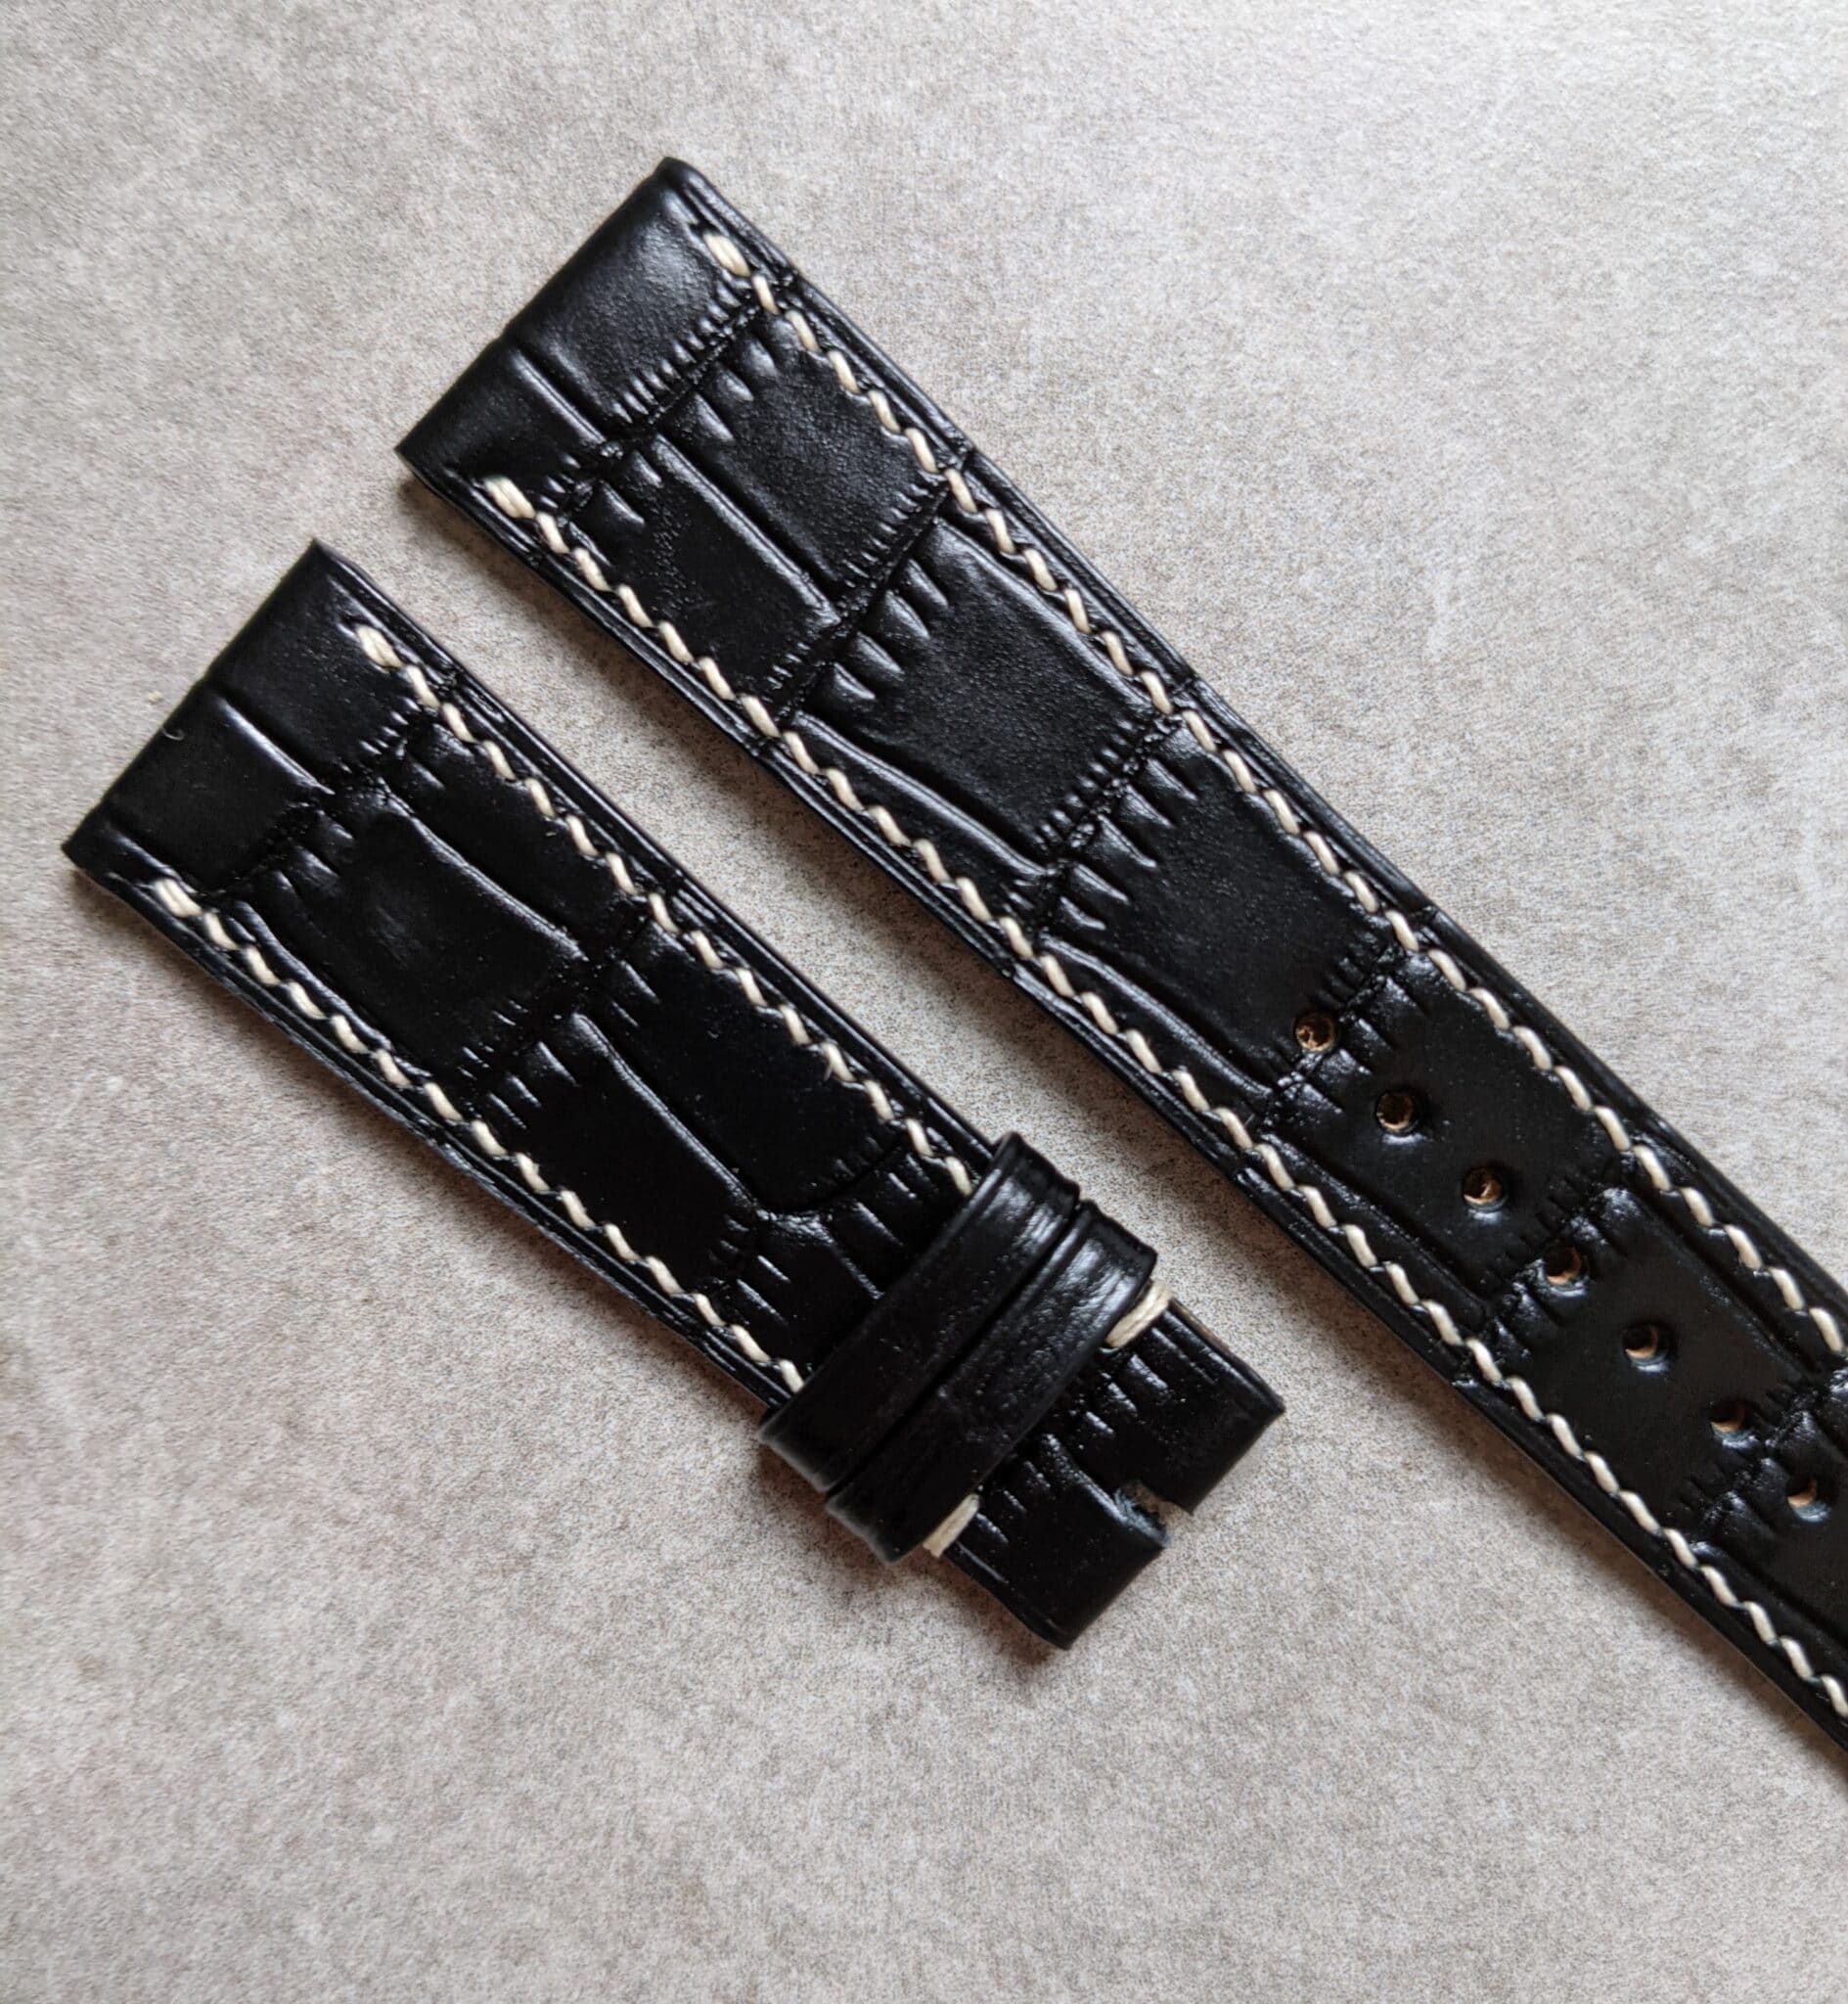 Embossed Crocodile Watch Strap - Black w/cream stitching - The Strap Tailor